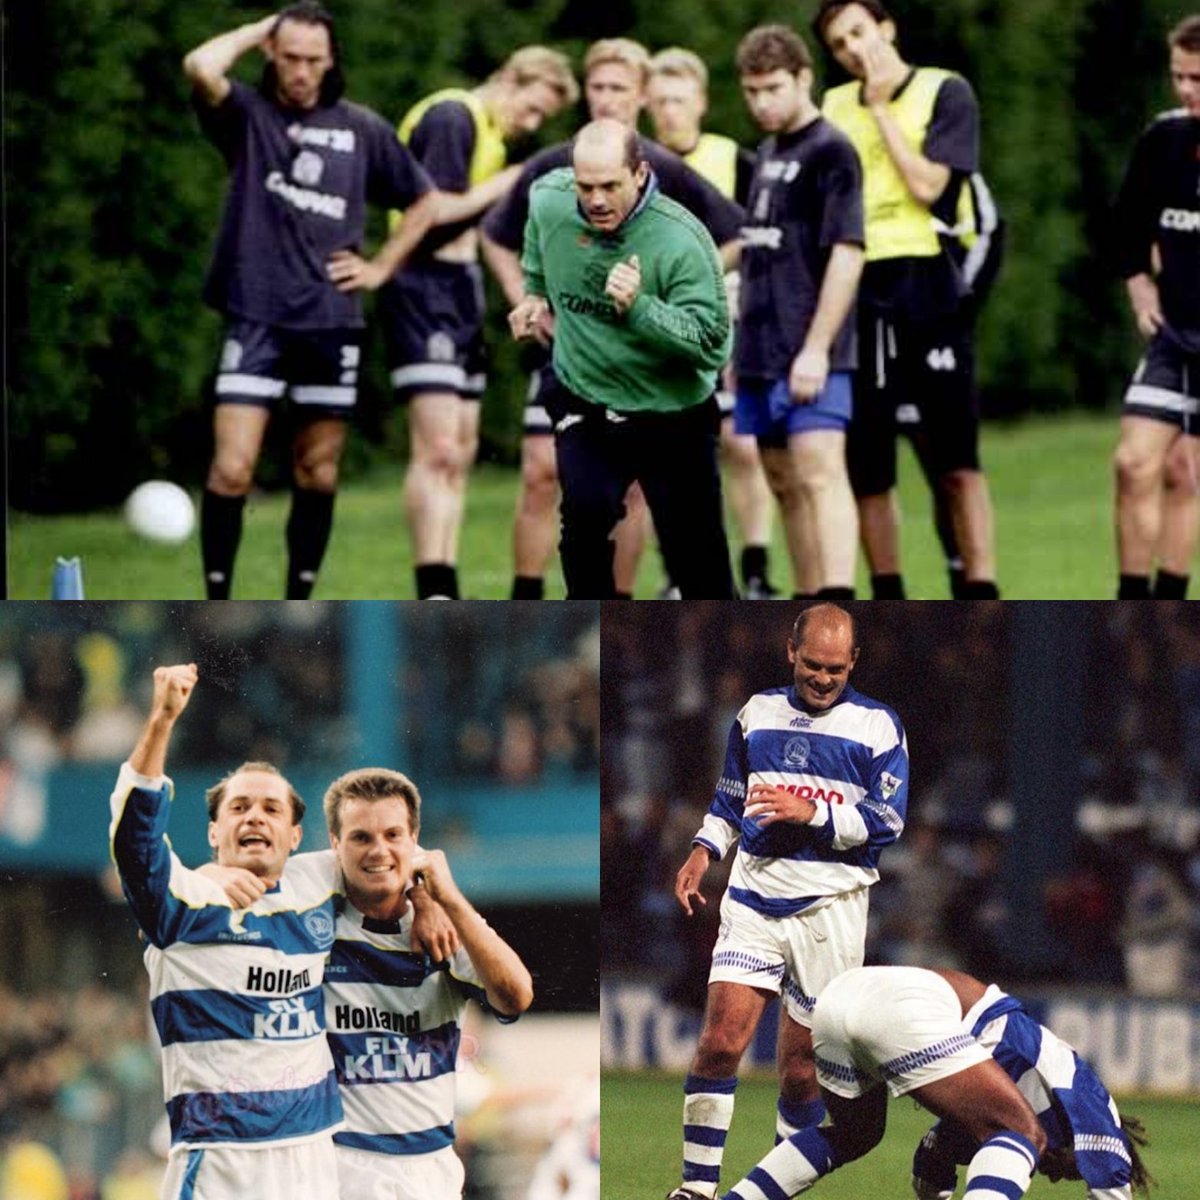 I was at the training ground tonight and started looking at some old pics of dad @QPR . What an unreal club this is, 100% some of my best memories from my childhood. @AndySintonQPR @trevor8sinclair 💙🤍